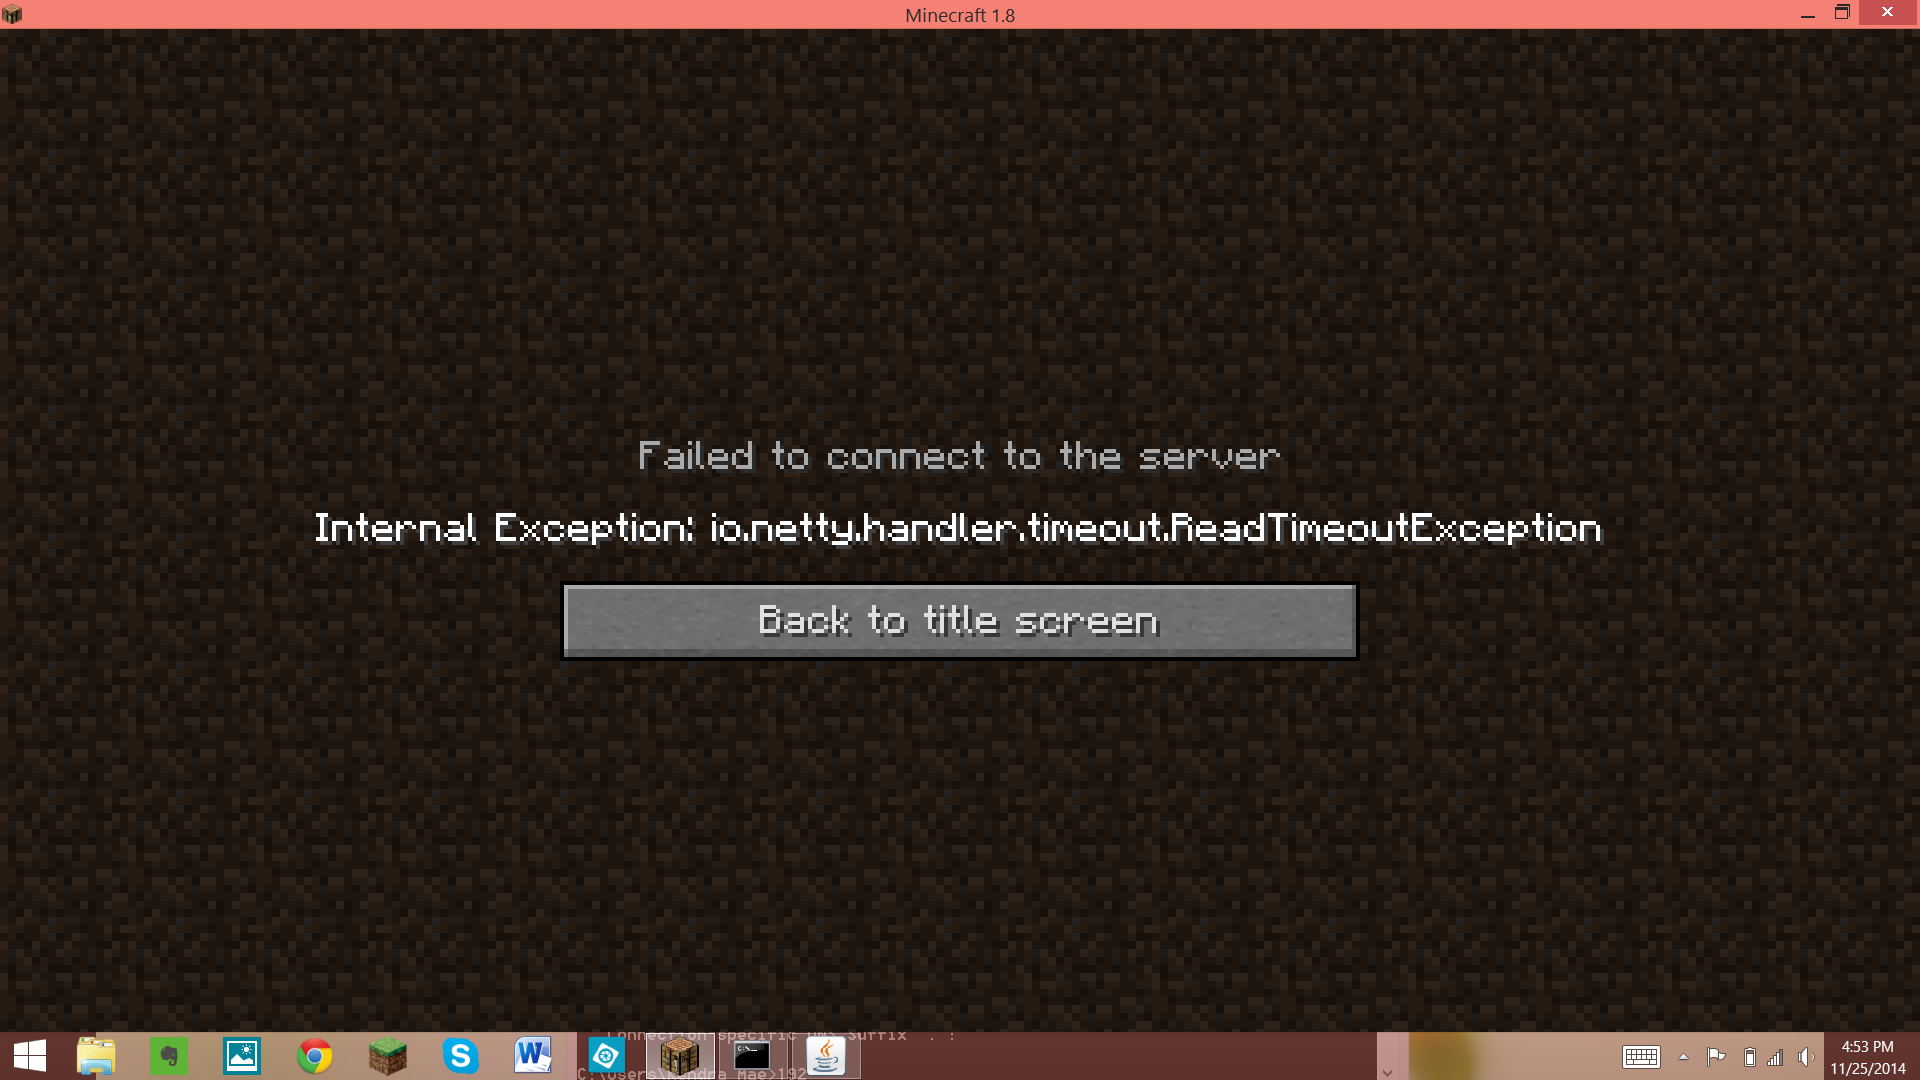 minecraft cannot connect to server in launcher